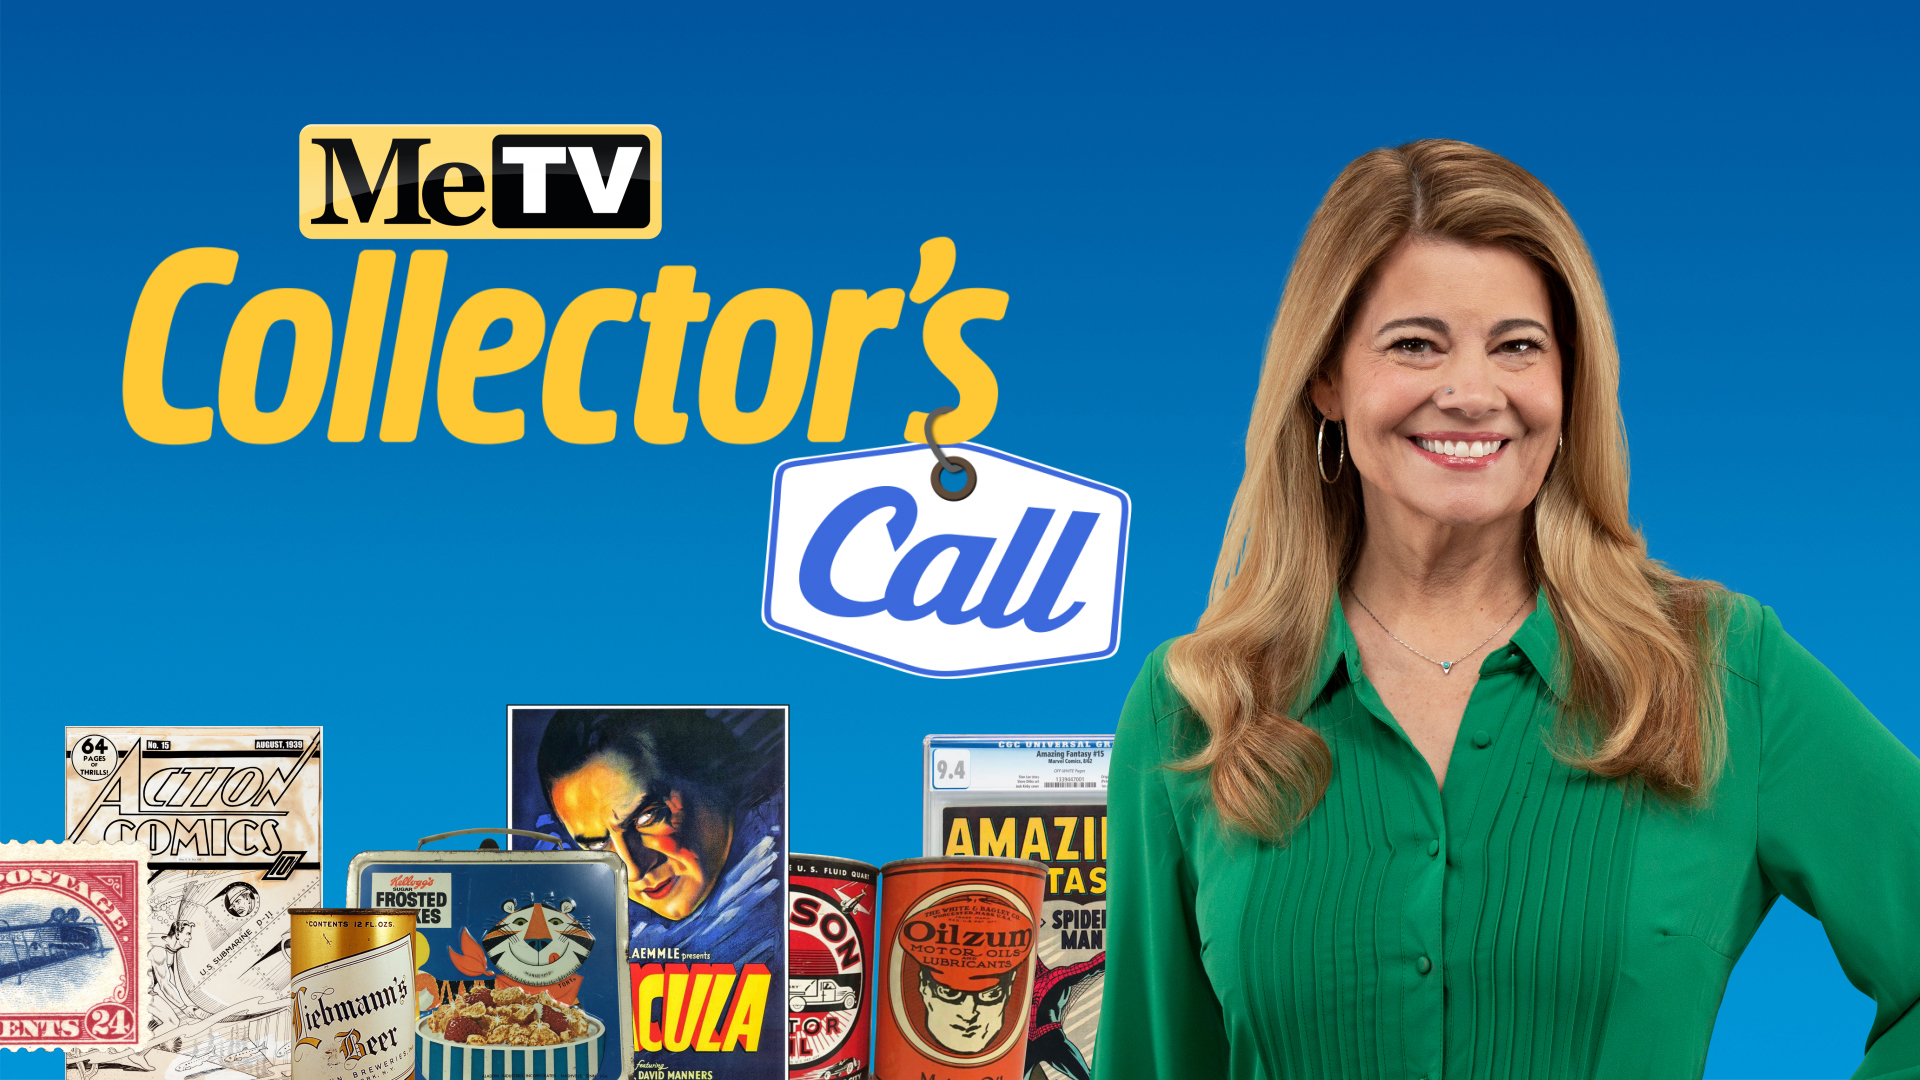 key art for the MeTV series "Collector's Call." A picture of host Lisa Whelchel, wearing a green blouse and smiling, is on the right, against a blue background. In upper left, in yellow lettering, is the MeTV logo, below which is the title "Collector's Call." Along the bottom left, in a line leading up to Whelchel on the right, are images of various valuable pop-culture items, from an upside-down airplane on an old postage stamp, to "Action Comics No.1" and others.